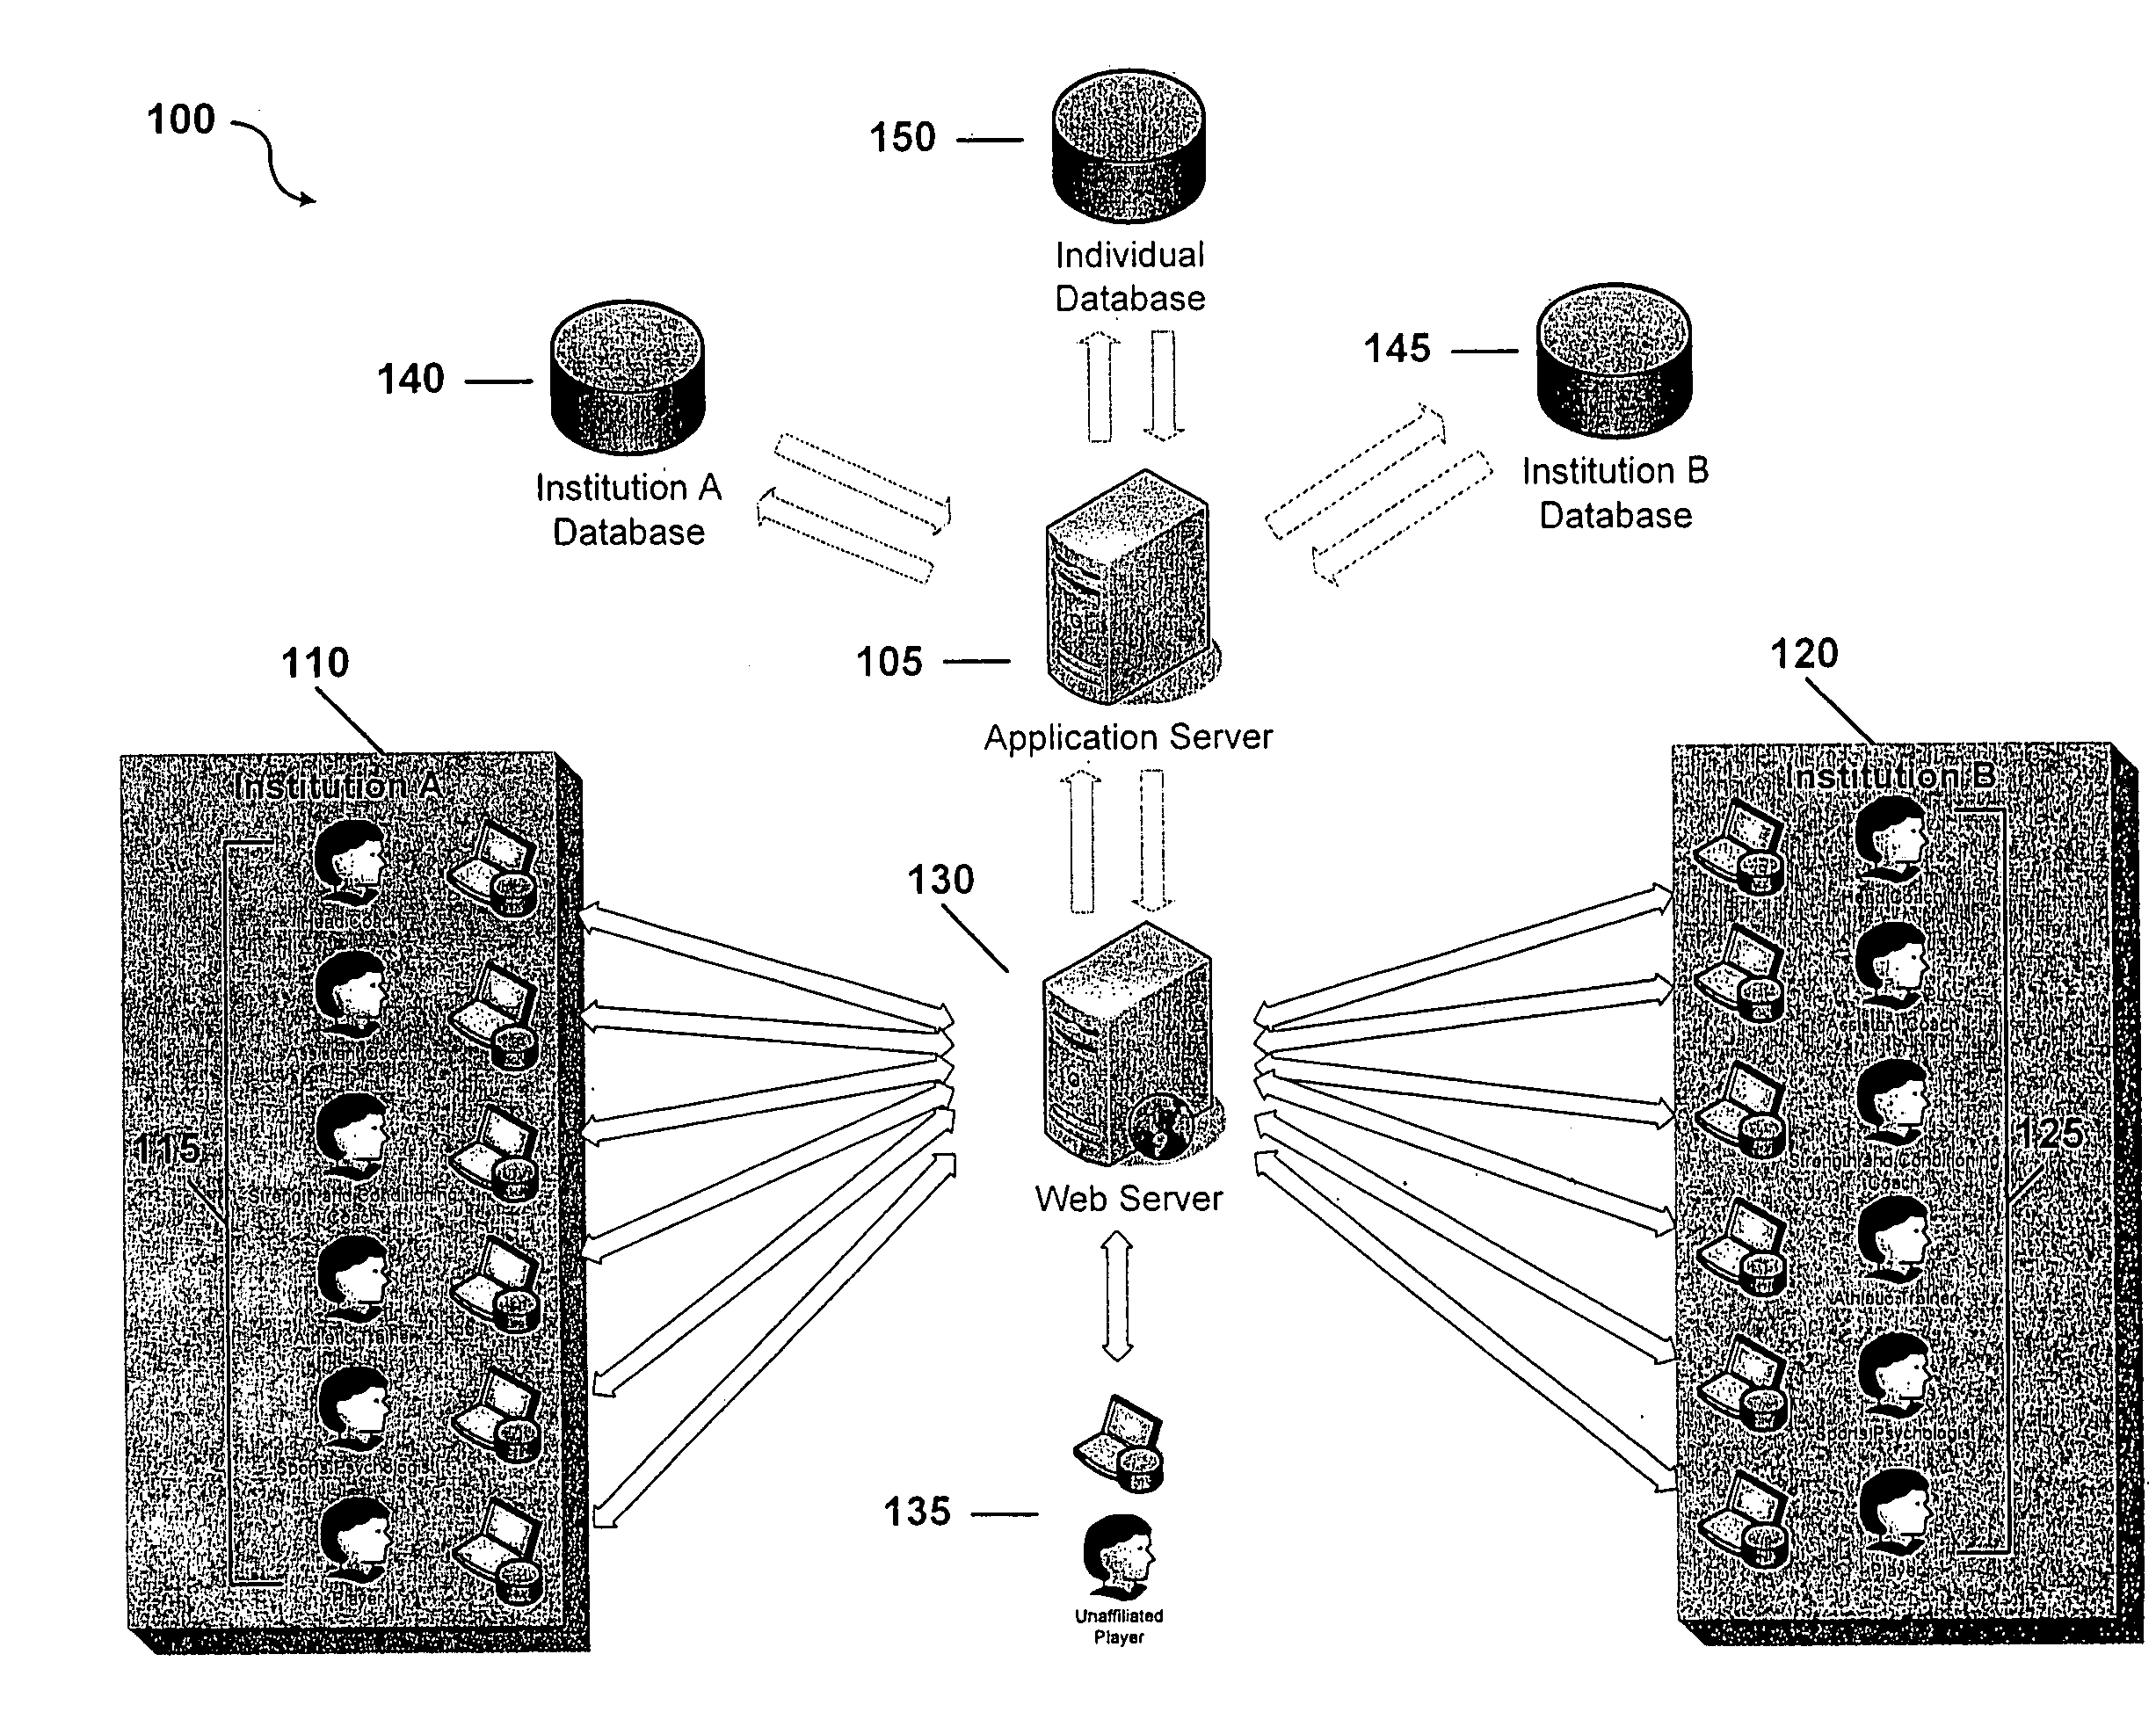 Systems and methods for integrating sports data and processes of sports activities and organizations on a computer network